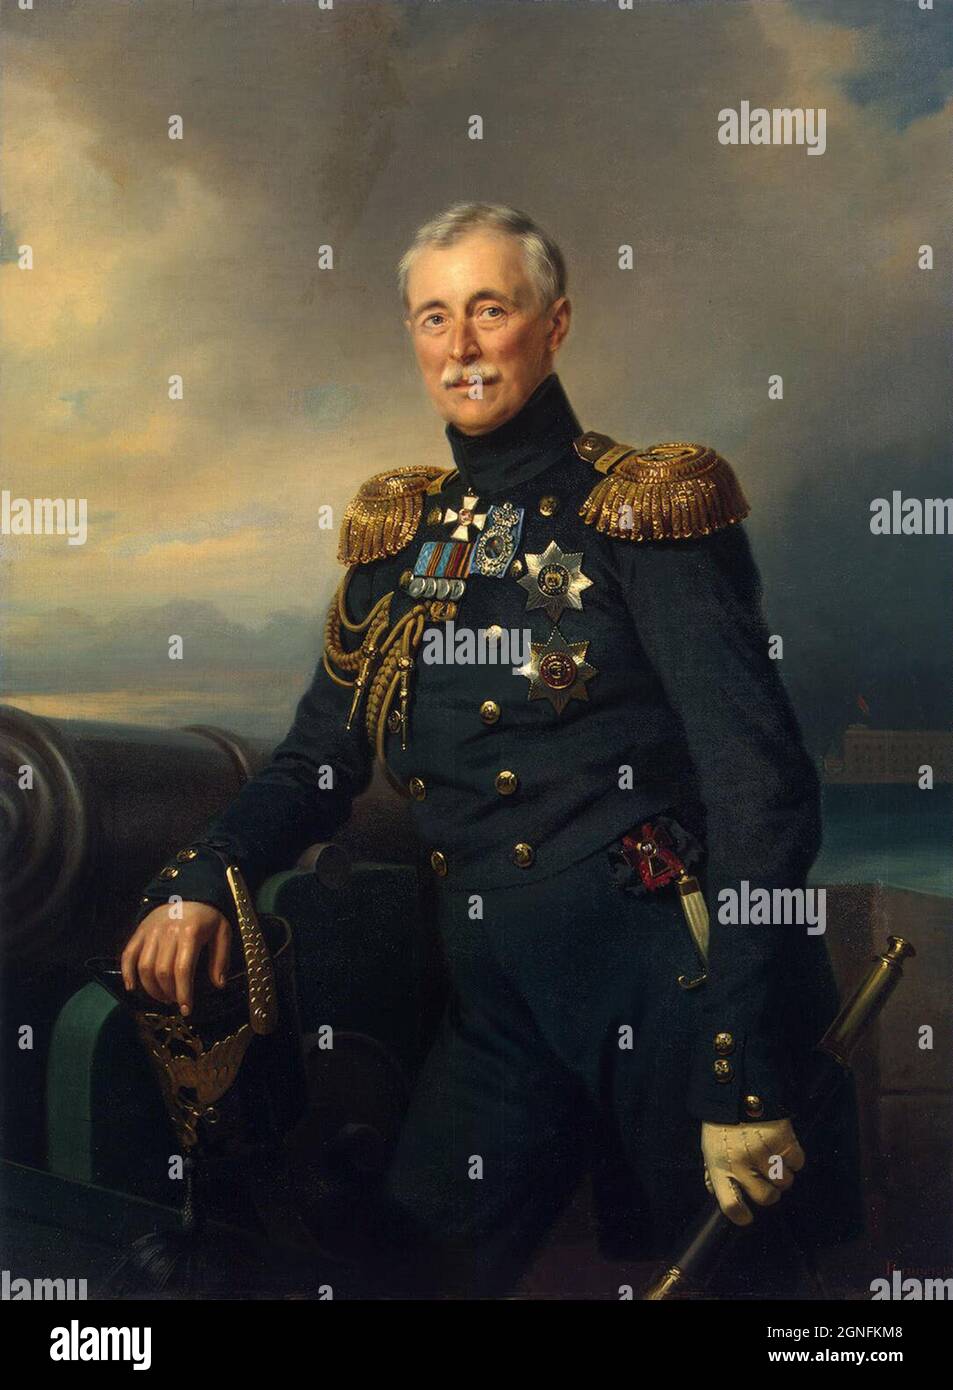 Alexander Menshikov, Russian commander-in-chief in the Crimea. Painting by  by Franz Kruger. Stock Photo